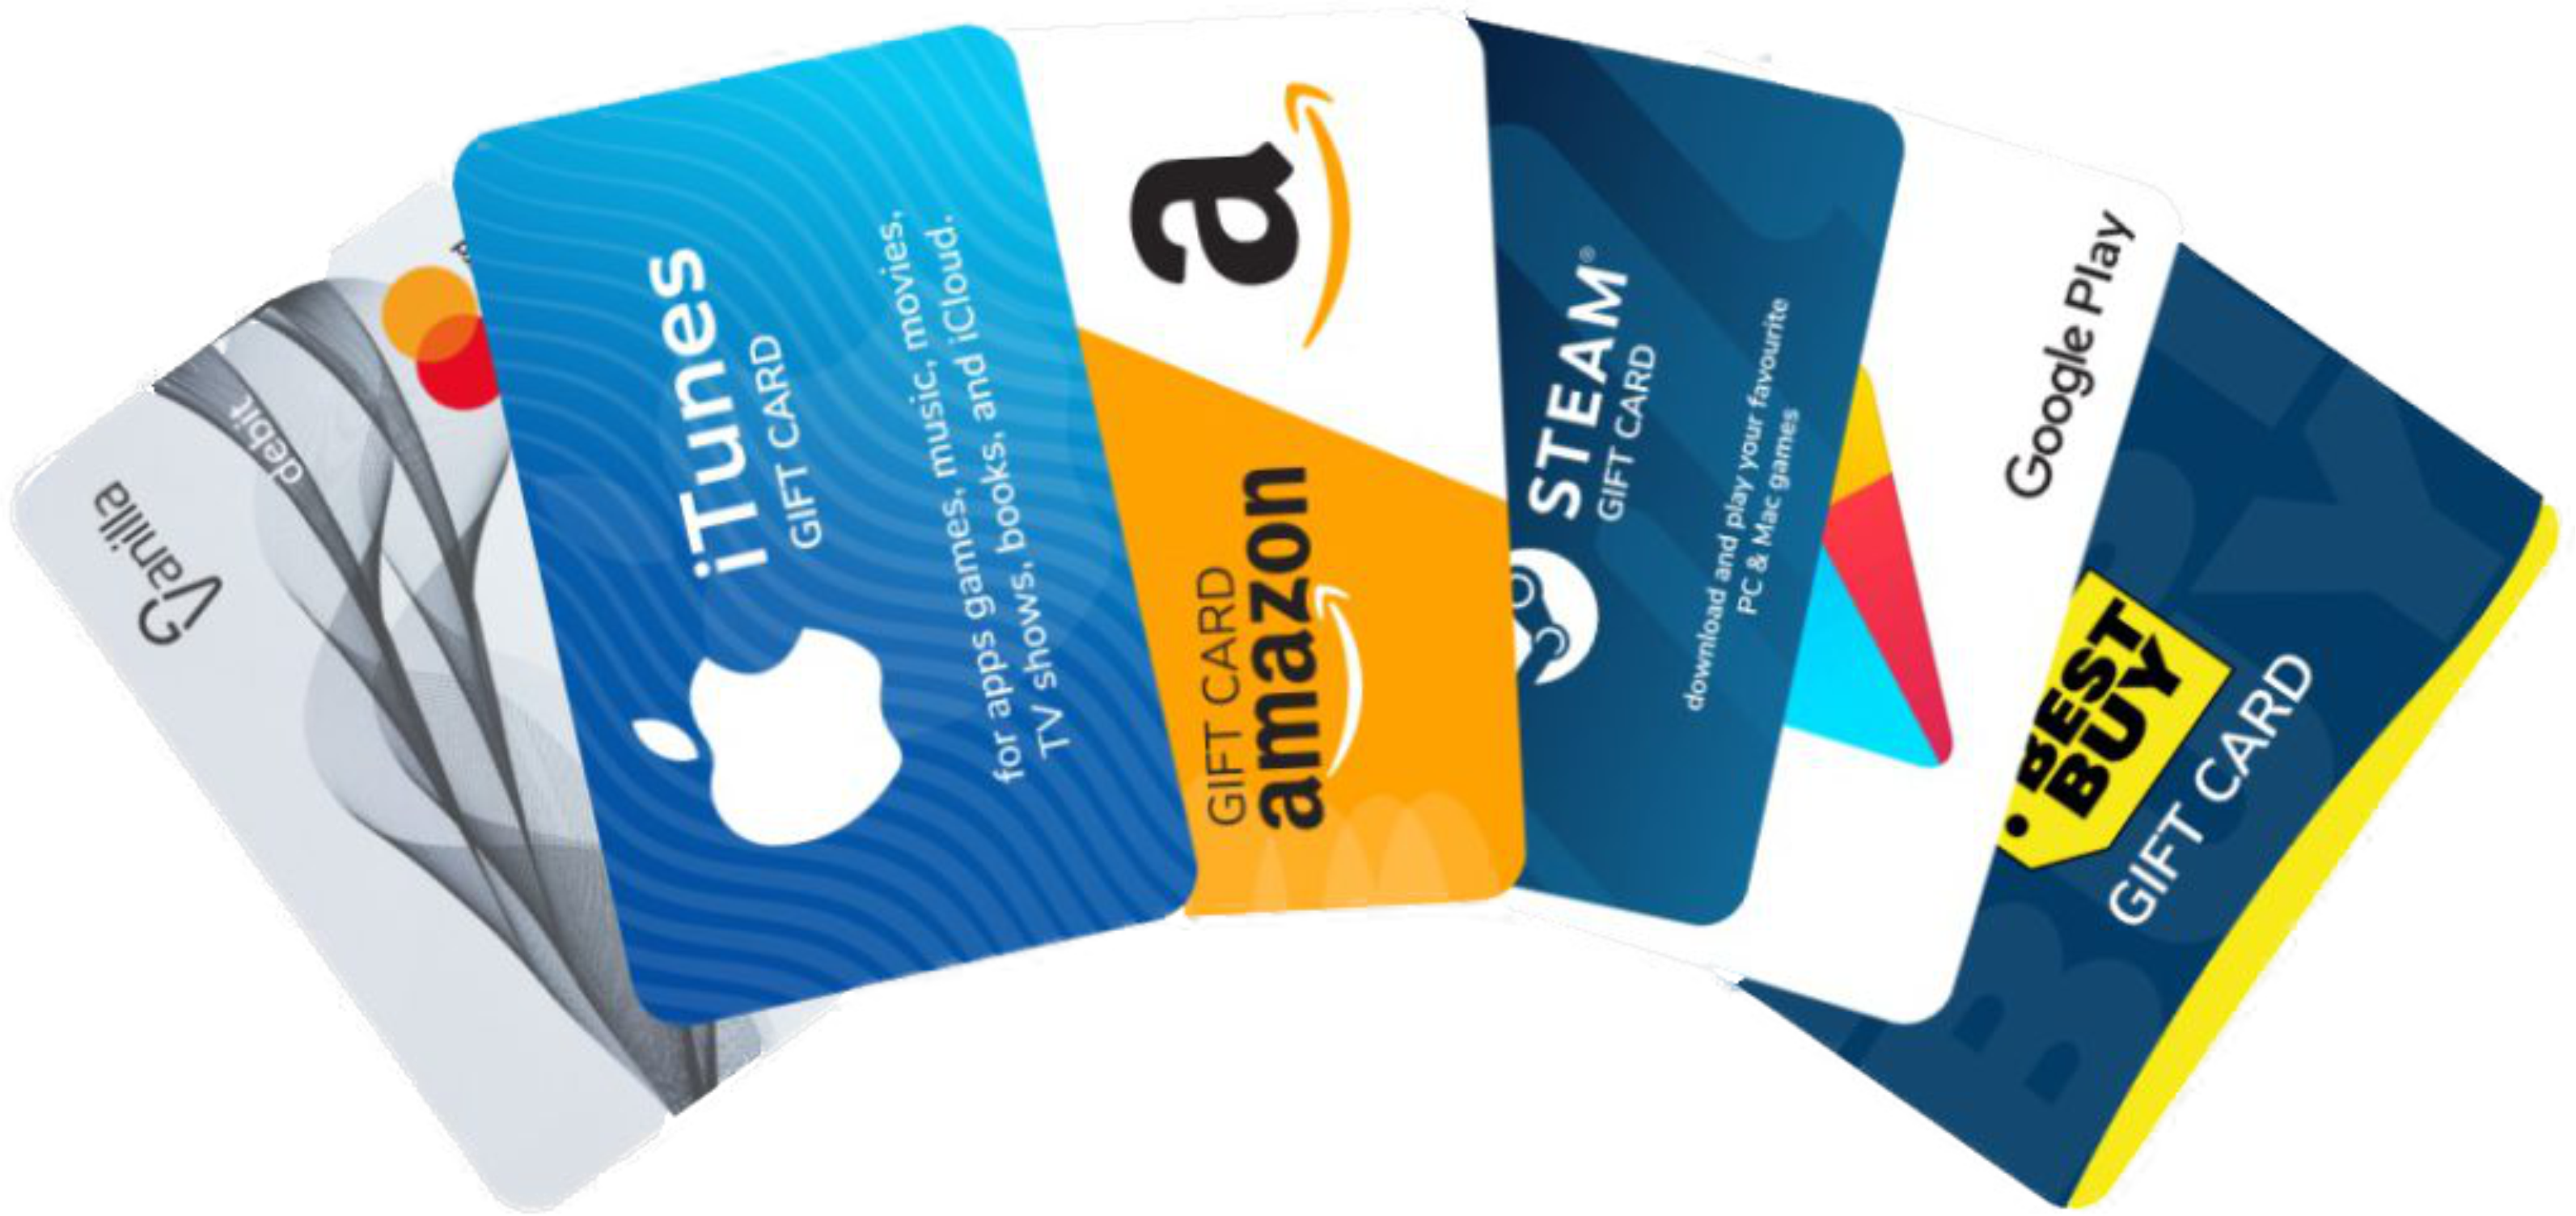 Gift cards for cash: Here's how to sell and trade them